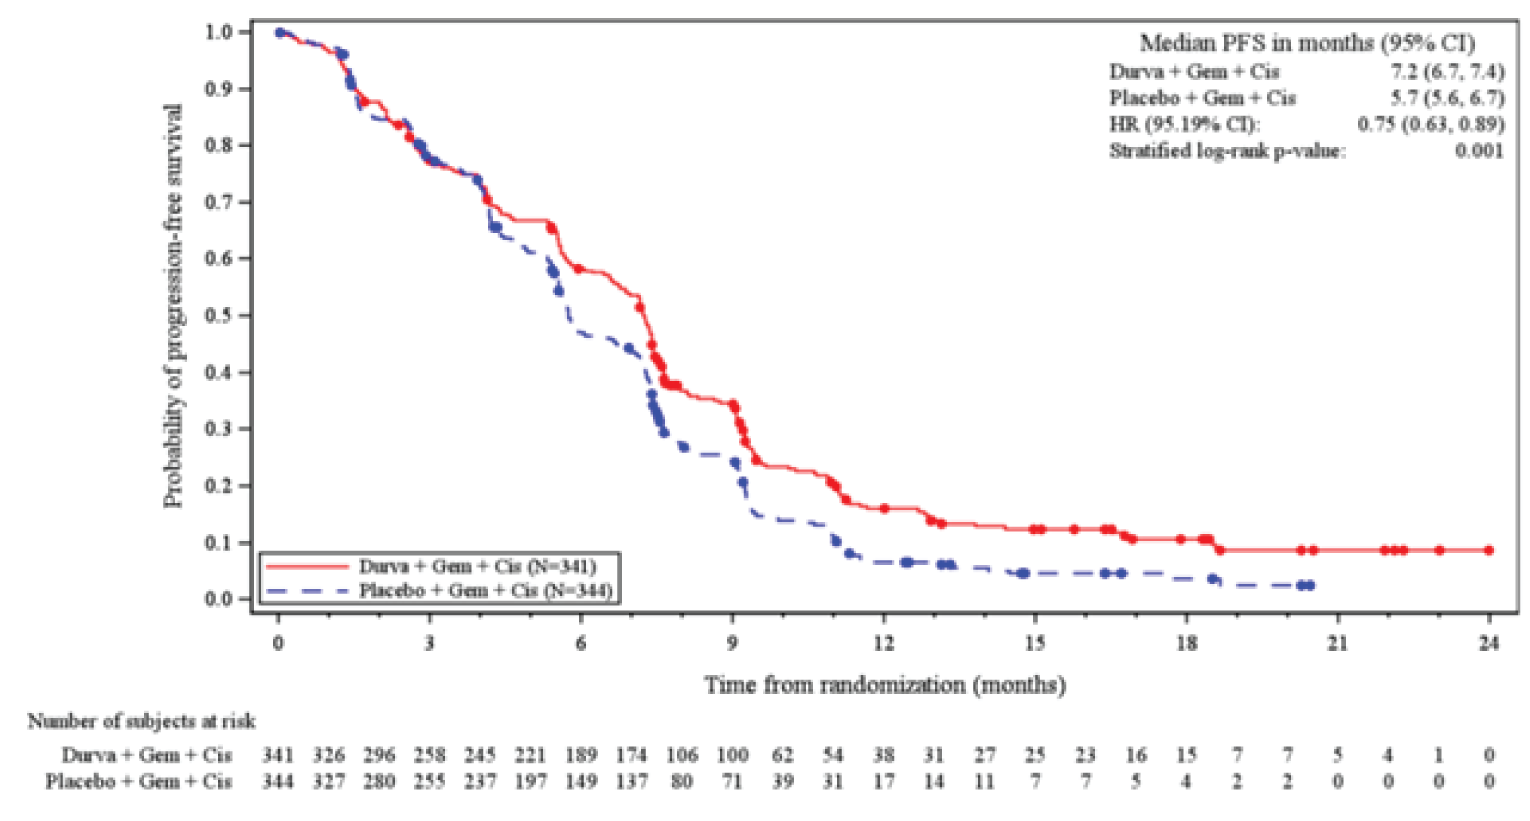 Kaplan-Meier curve for PFS in the FAS at IA-2. Curves began to separate around 4 months, and remained separated throughout the study (24 months). The median PFS with durvalumab + gemcitabine and cisplatin was 7.2 months (95% CI, 6.7 to 7.4 months) and 5.7 months (95% CI, 5.6 to 6.7 months) with placebo plus gemcitabine and cisplatin.